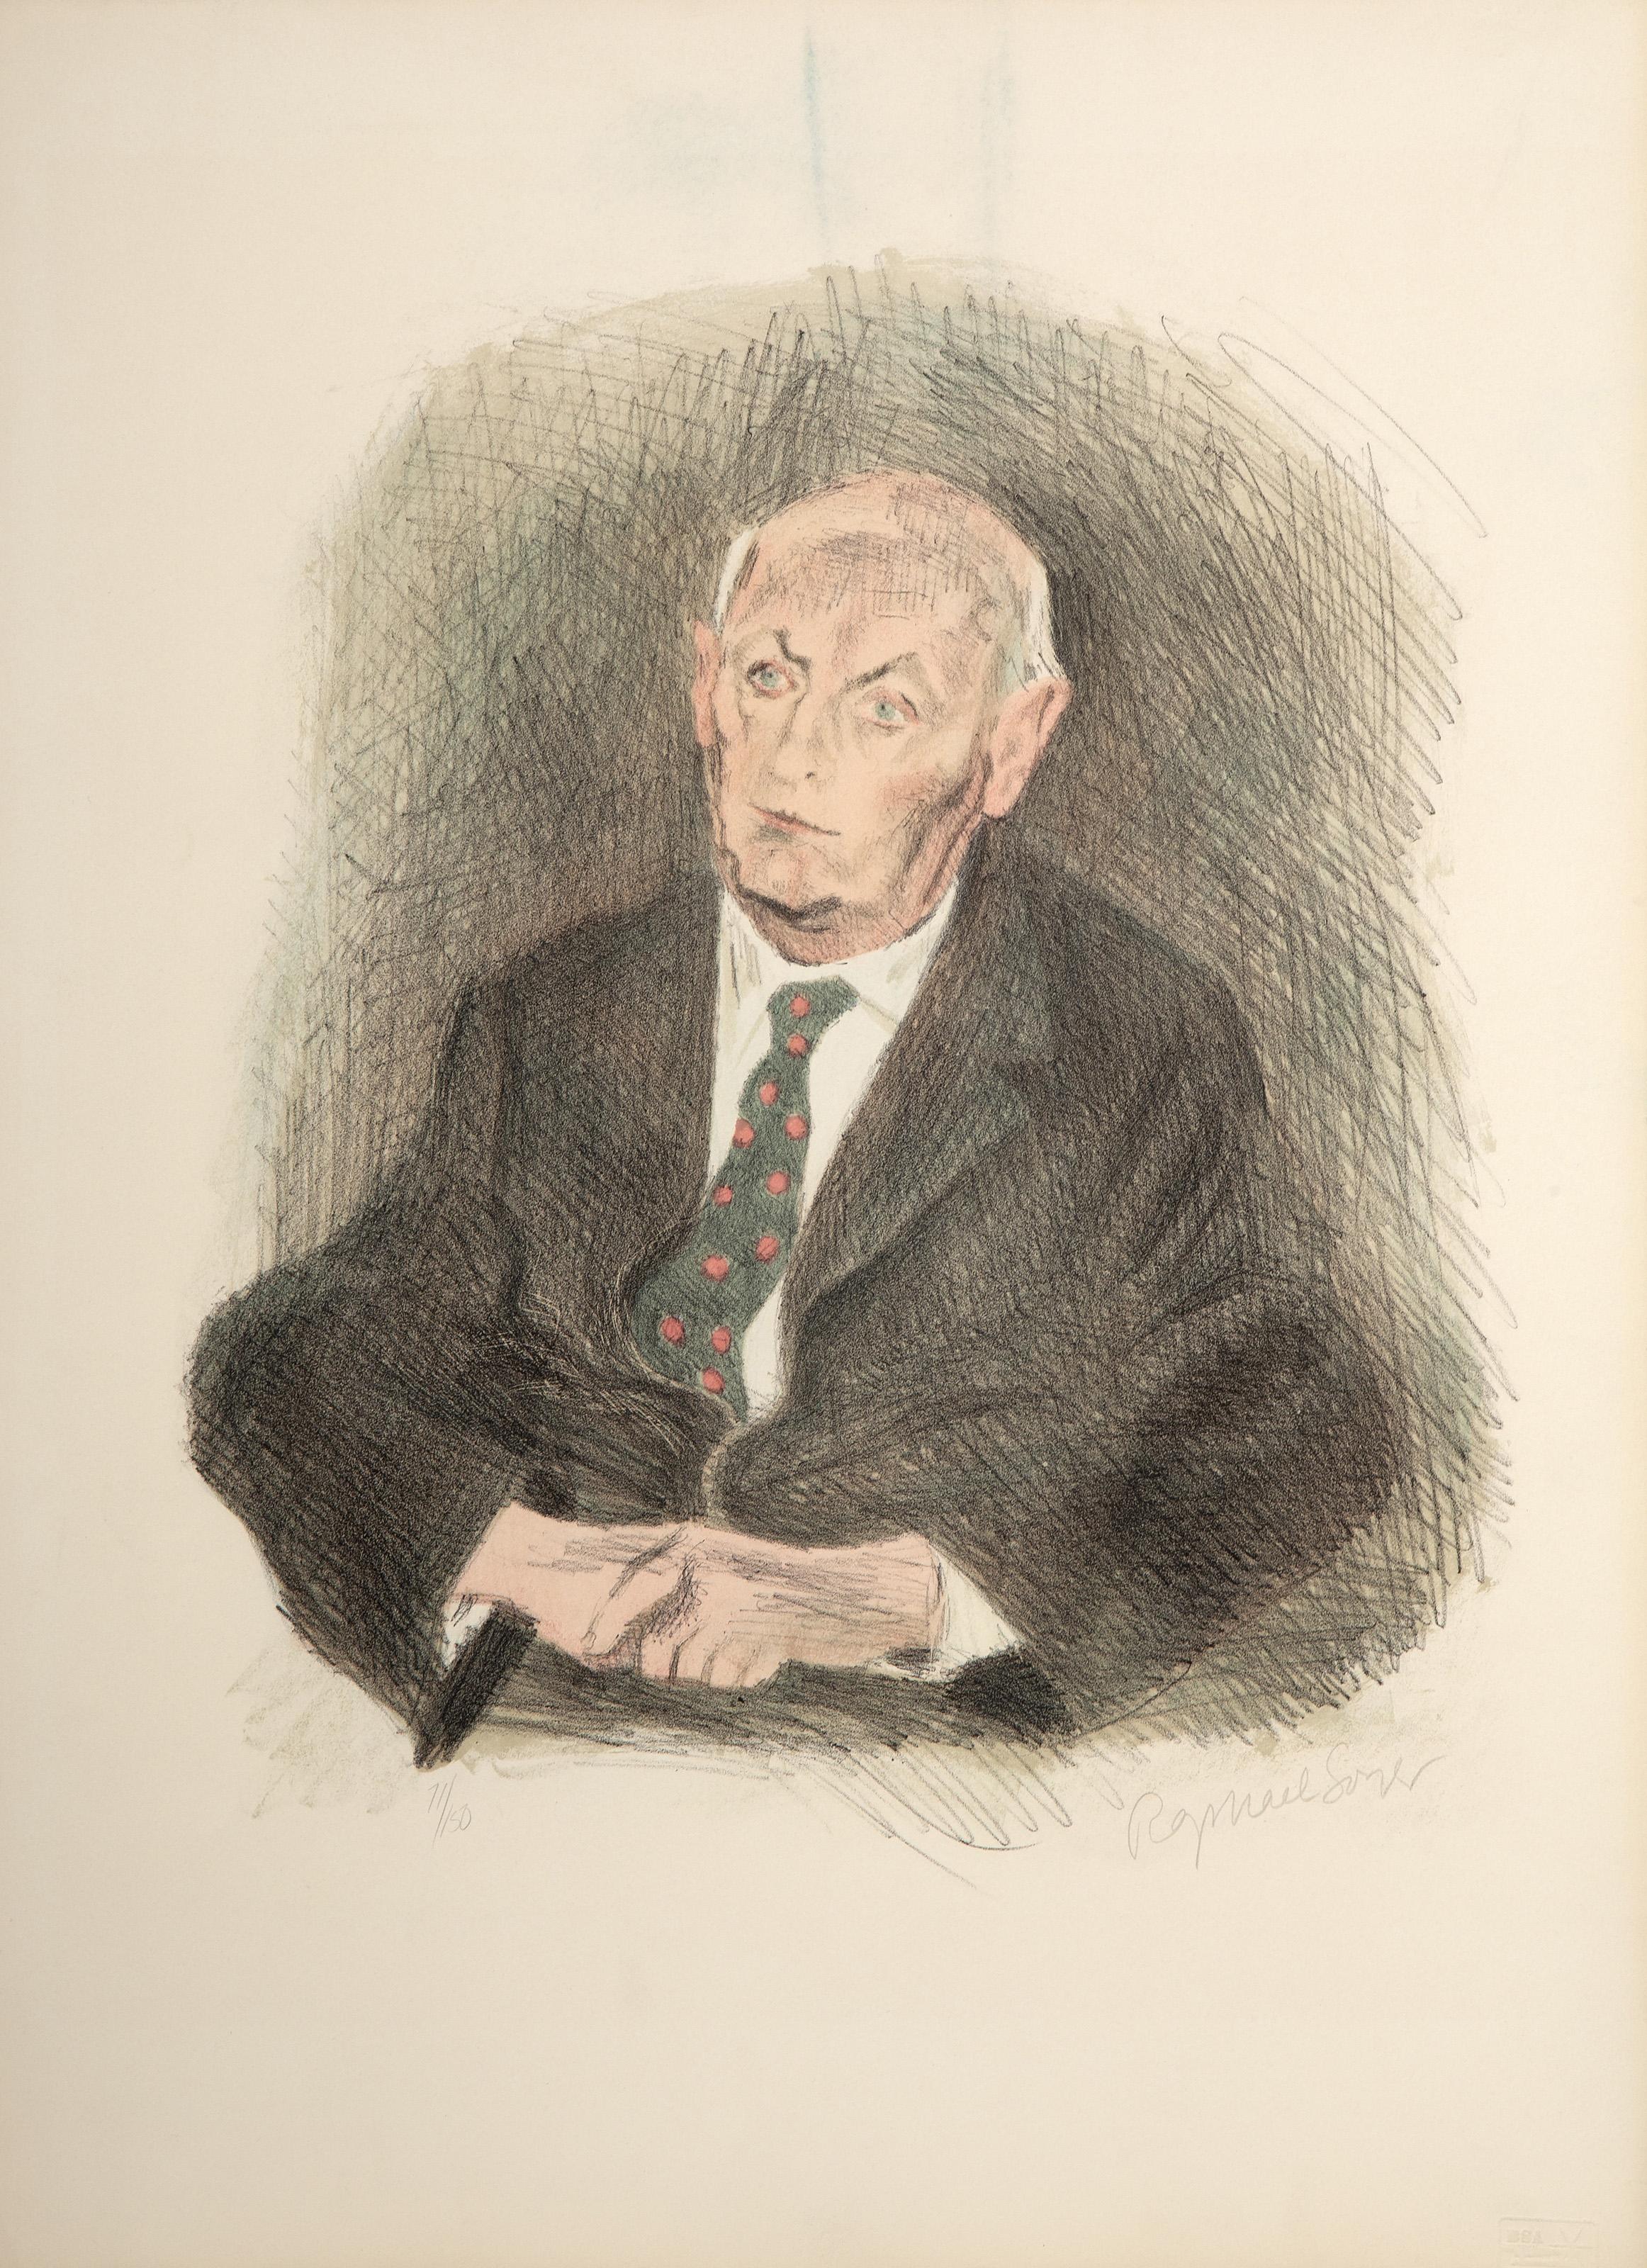 Raphael Soyer, Russian/American (1899 - 1987) -  Portrait of Isaac. Year: 1970, Medium: Lithograph, signed and numbered in pencil, Edition: 71/150, Size: 26 x 19 in. (66.04 x 48.26 cm), Publisher: Touchstone Publishers, NY 